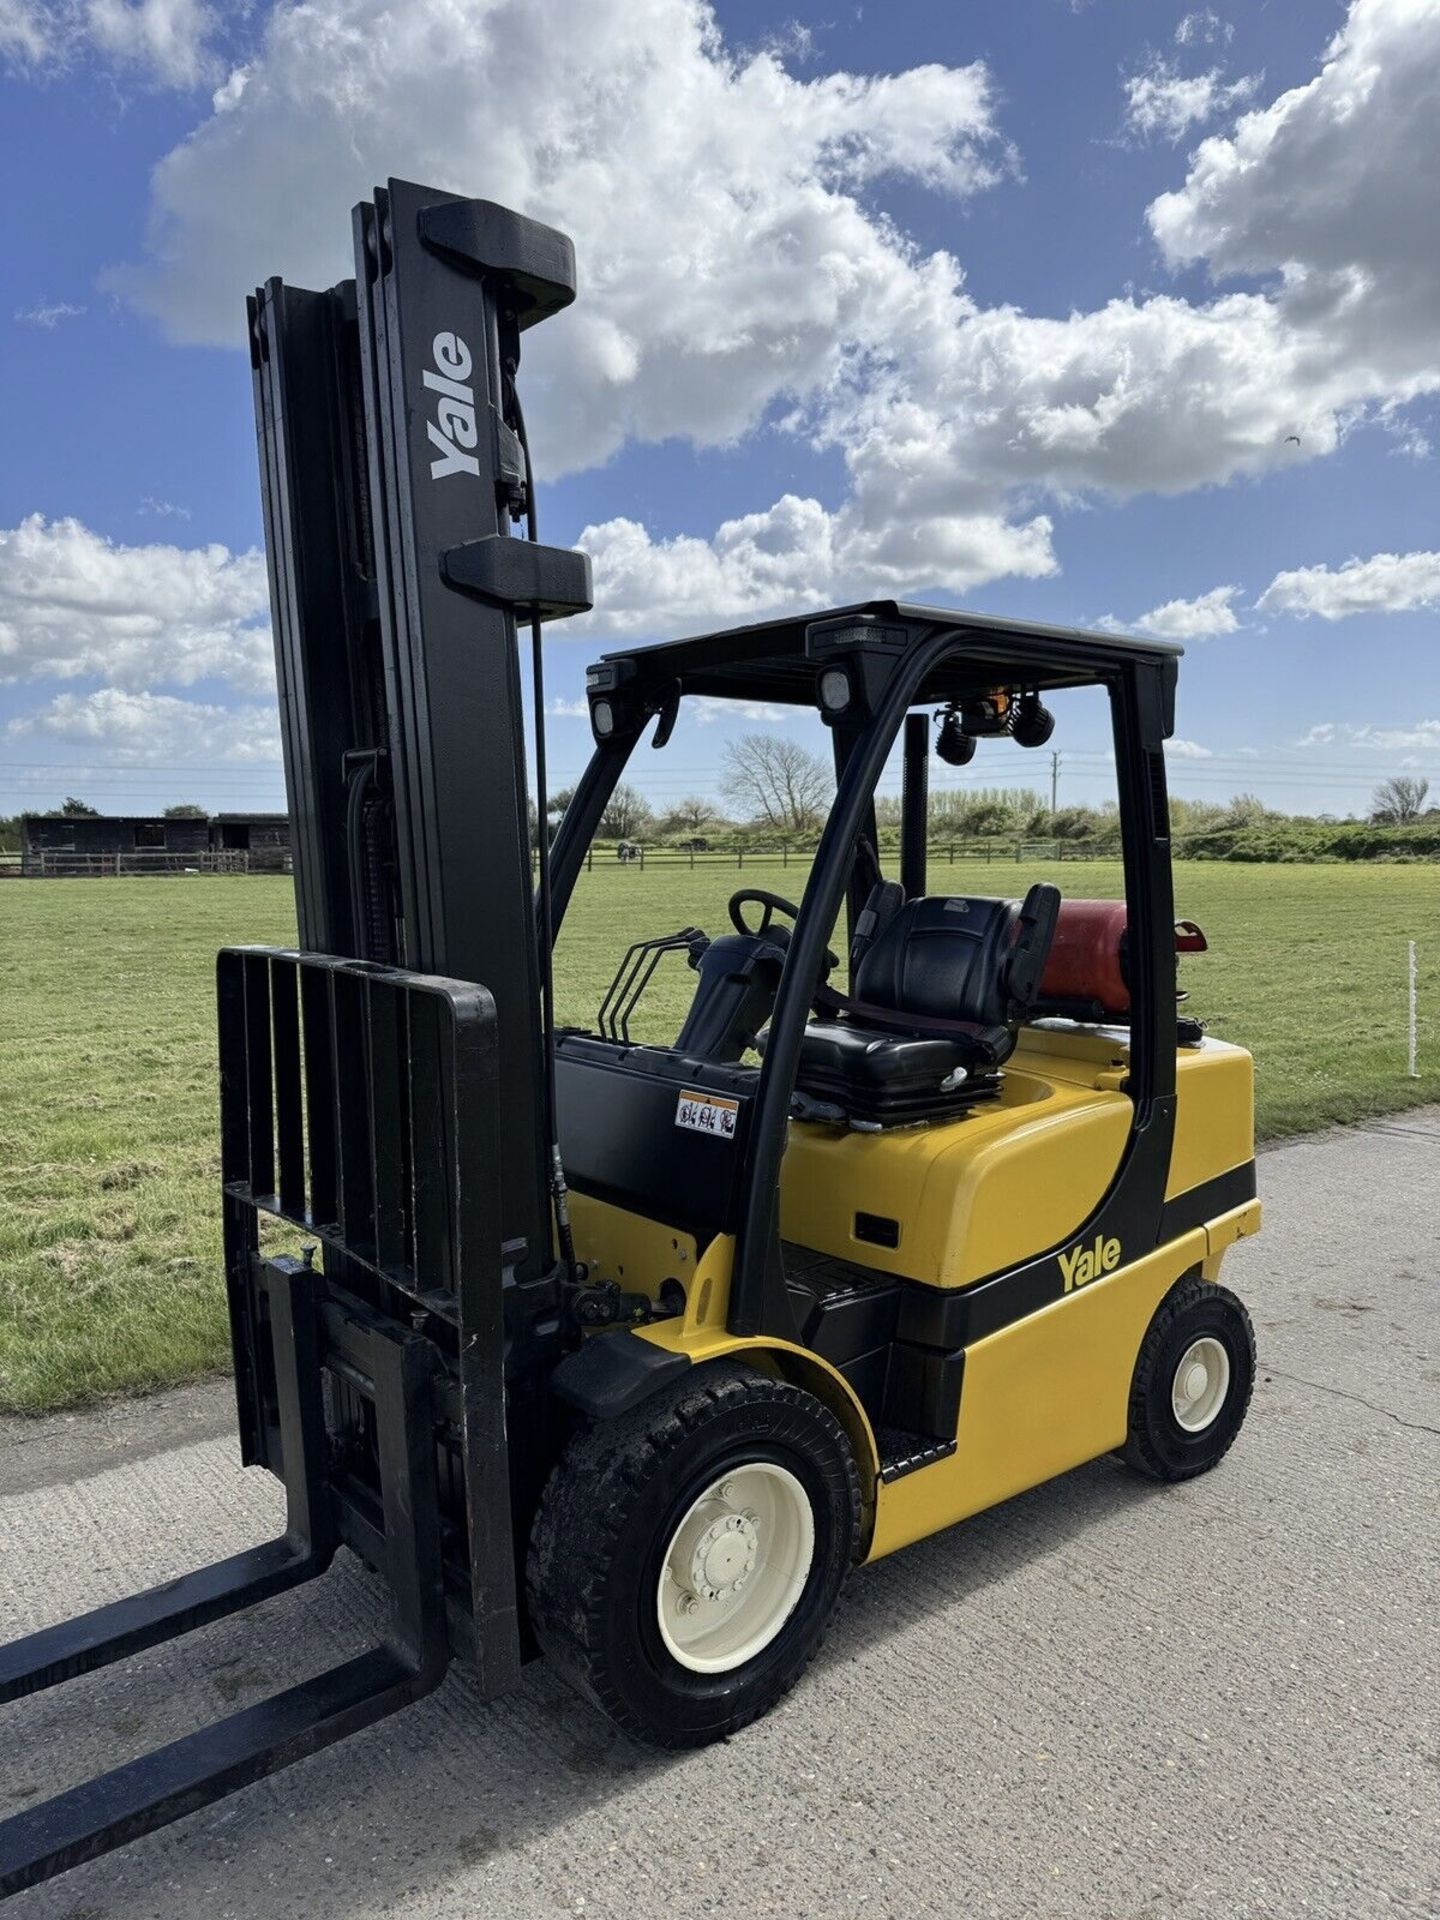 2017 - YALE Gas Forklift Truck (5.9 m lift) - Only 2200 Hours